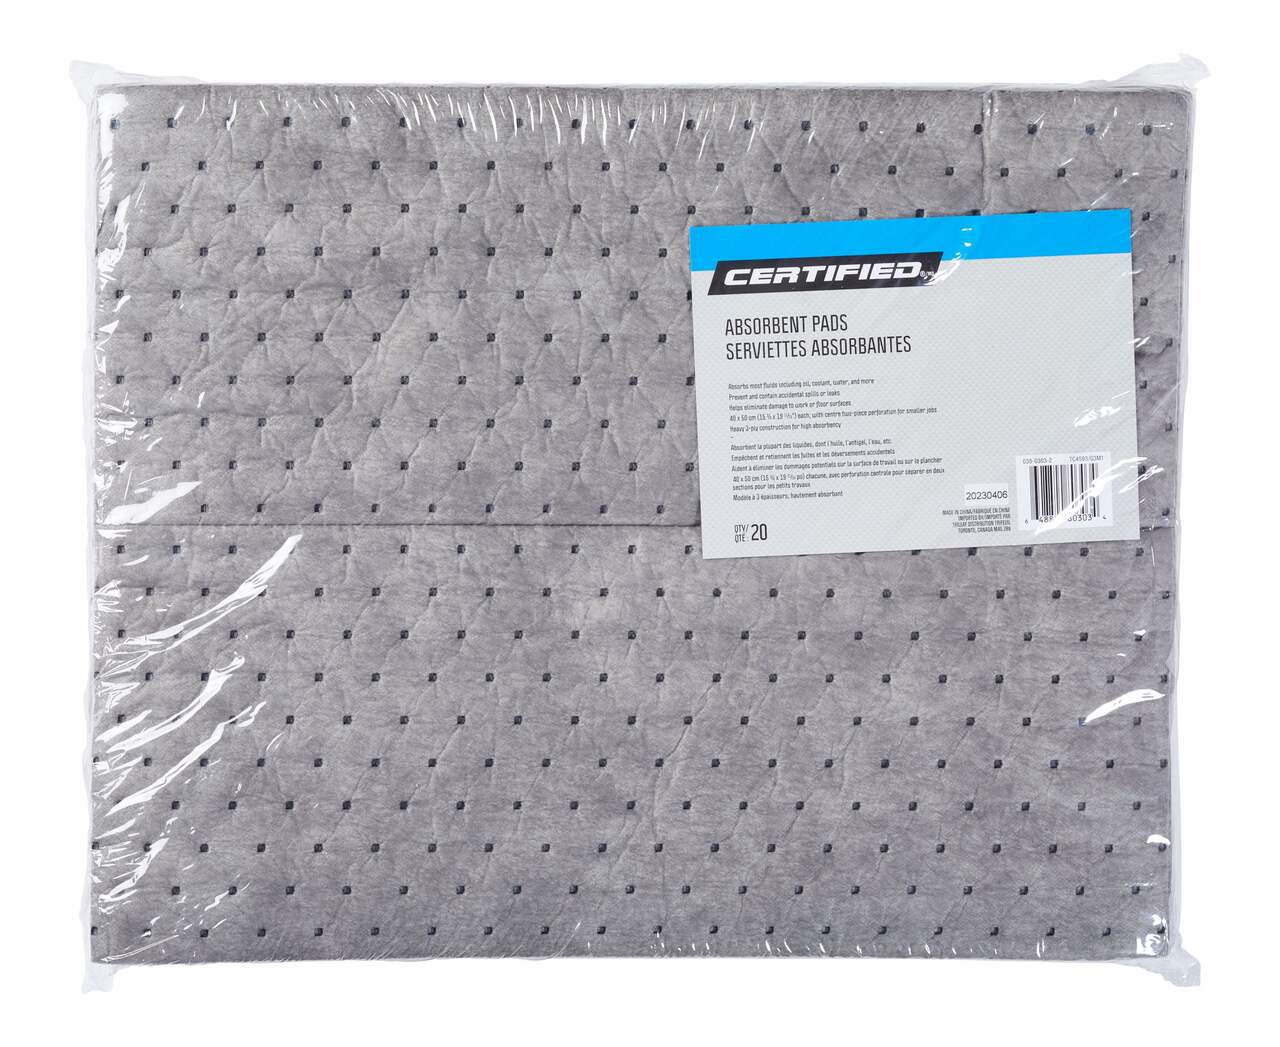 https://media-www.canadiantire.ca/product/automotive/auto-maintenance/oil-change-and-fuel-accessories/0380303/certified-automotive-absorbent-pads-20pc-c0f94e15-8f37-46a8-a5ee-7c3e93a9937c-jpgrendition.jpg?imdensity=1&imwidth=1244&impolicy=mZoom